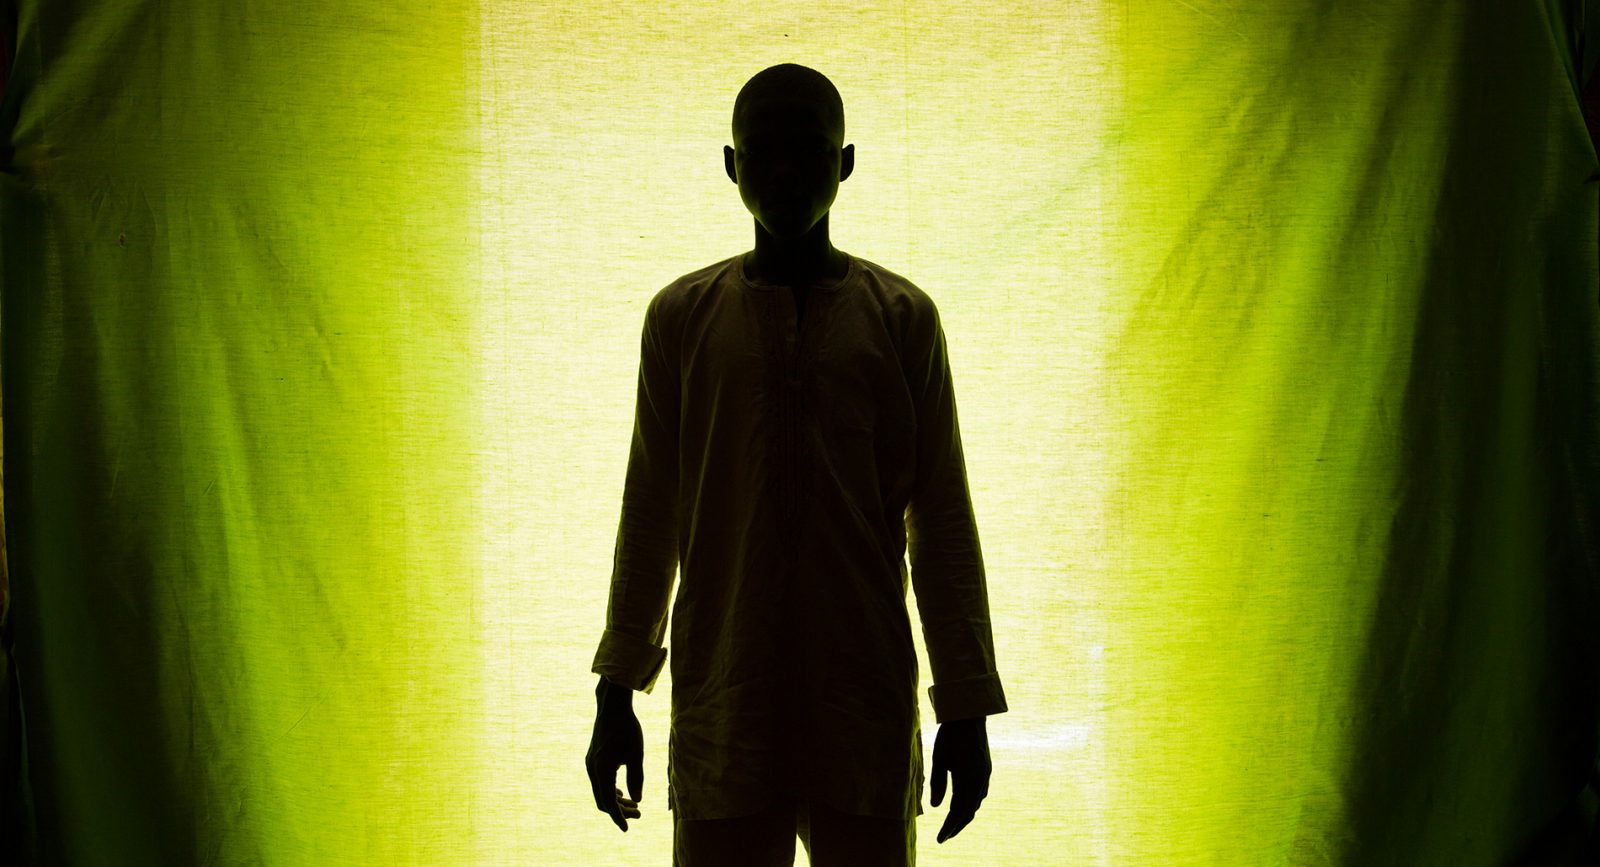 A silhouette of a man against a green background.